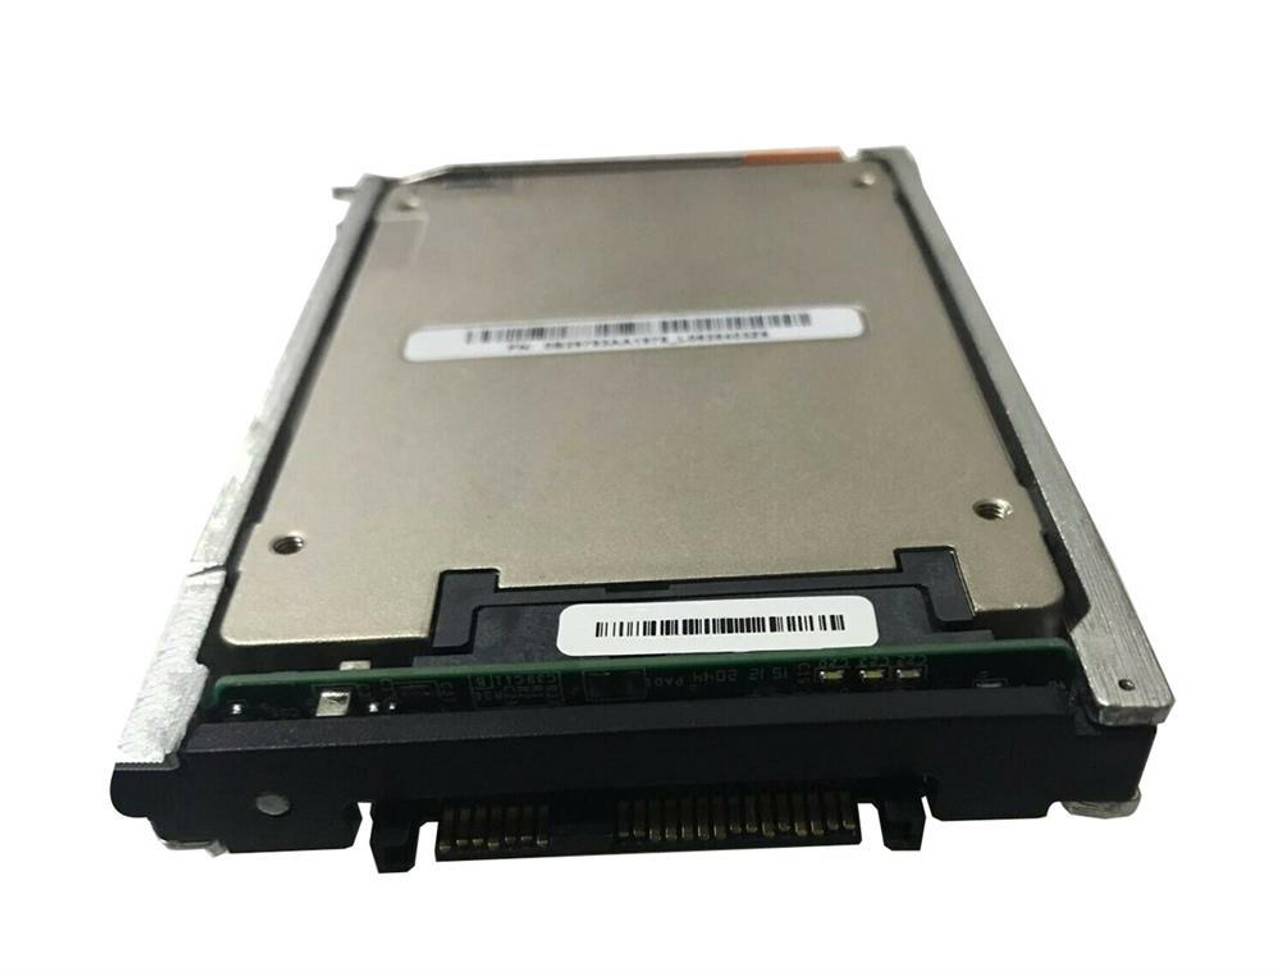 005-052115 EMC 960GB SAS 12Gbps 2.5-Inch Internal Solid State Drive (SSD)